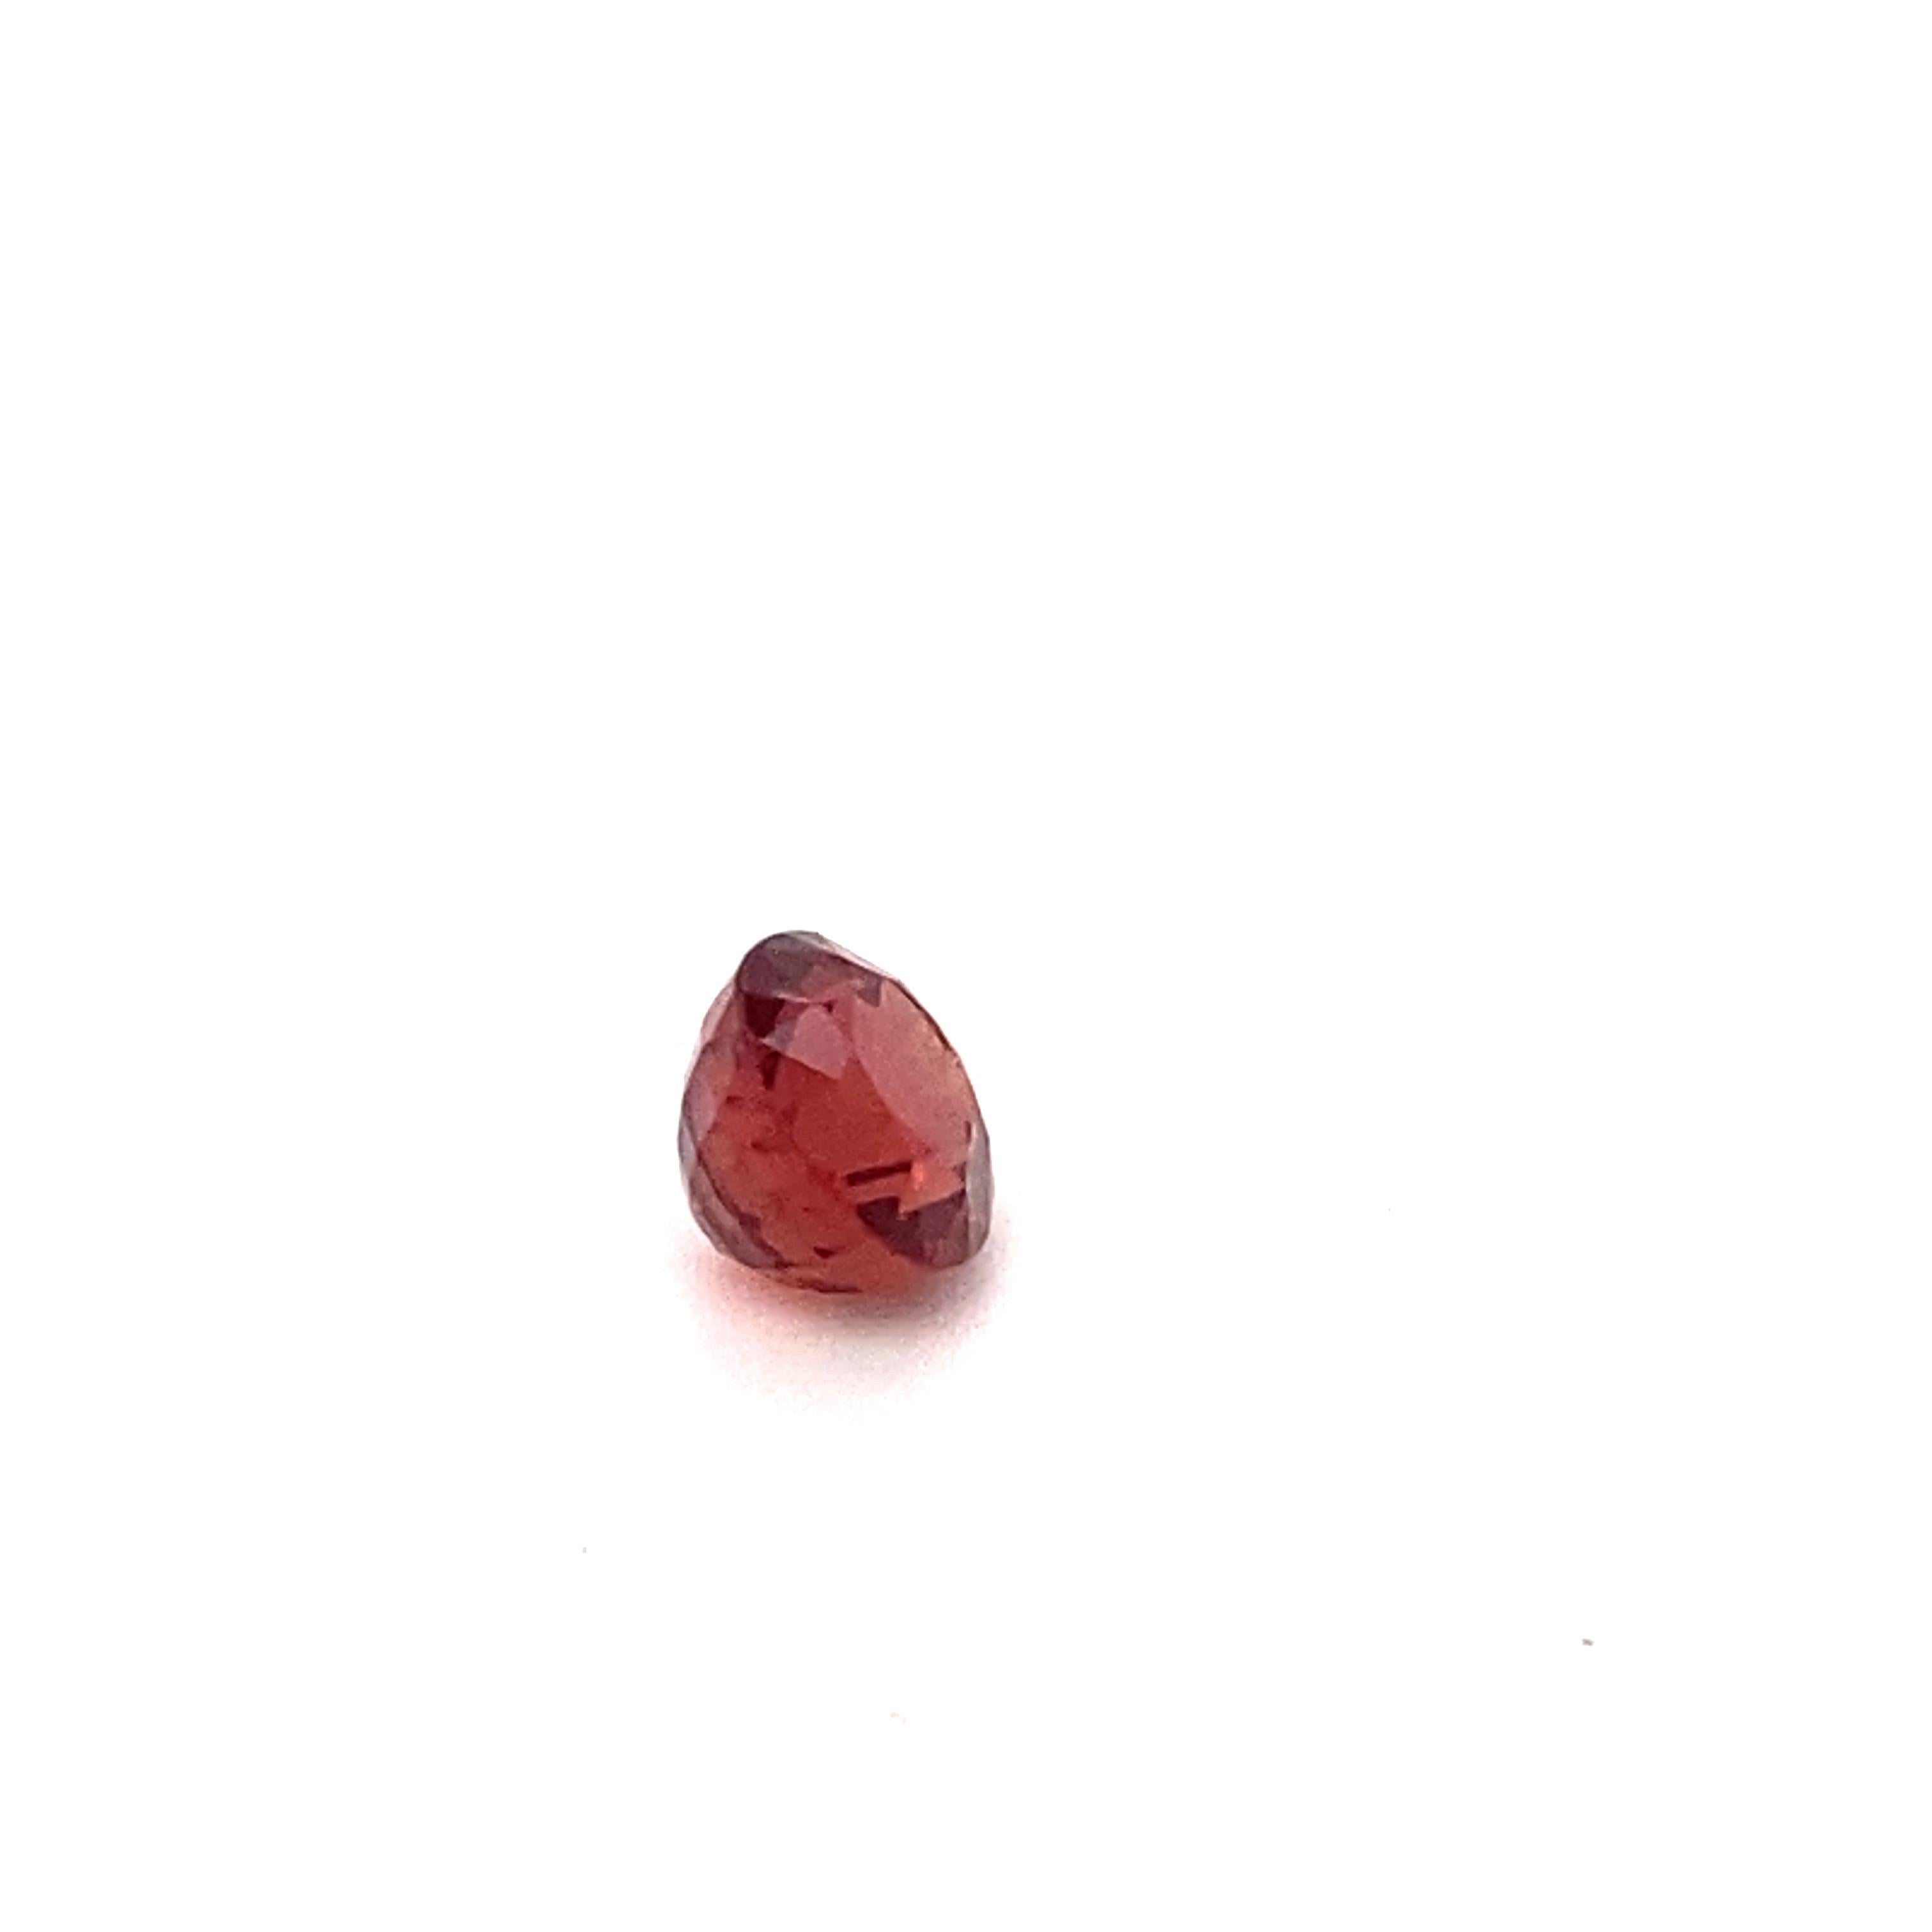 Oval Cut 2.25 Carat Oval Shape Natural Red Spinel Loose Gemstone 